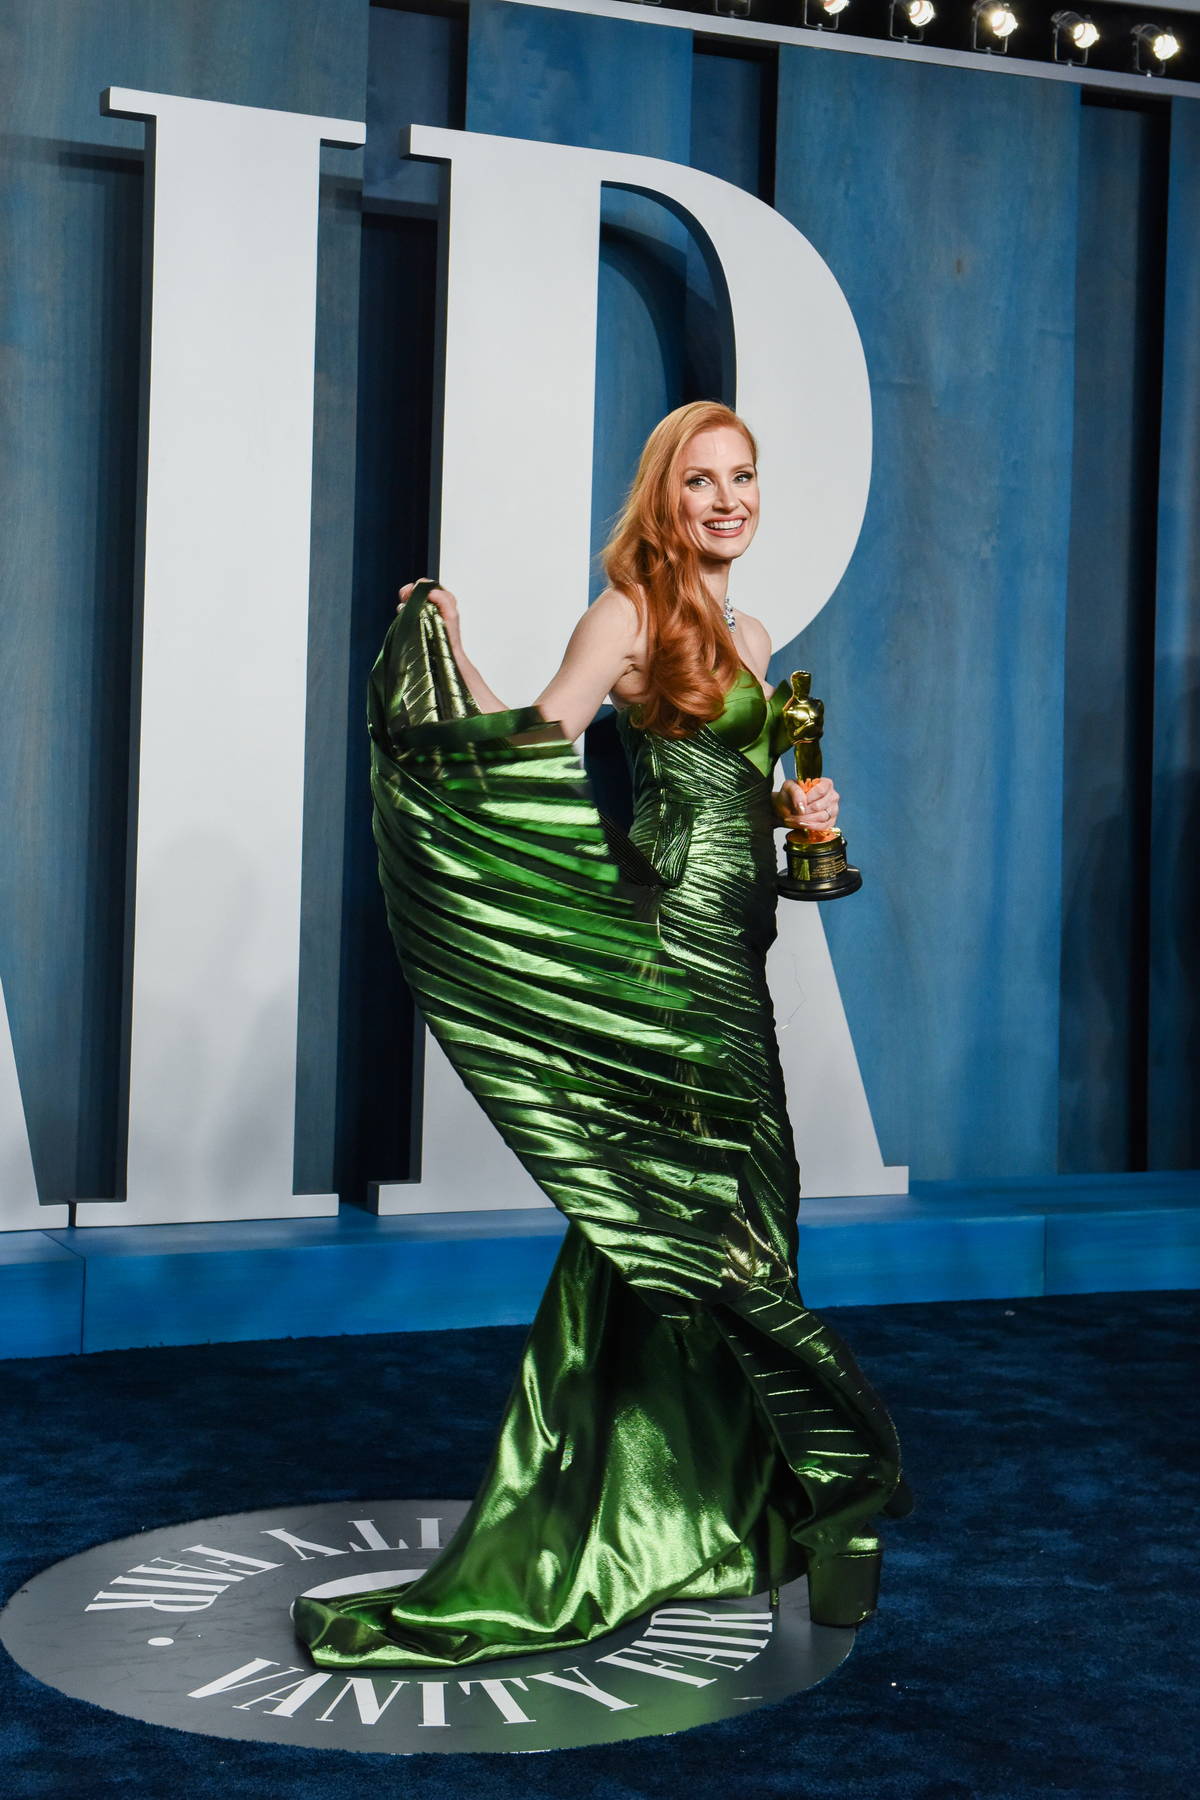 https://www.celebsfirst.com/wp-content/uploads/2022/03/jessica-chastain-attends-the-2022-vanity-fair-oscar-party-in-beverly-hills-california-270322_2.jpg